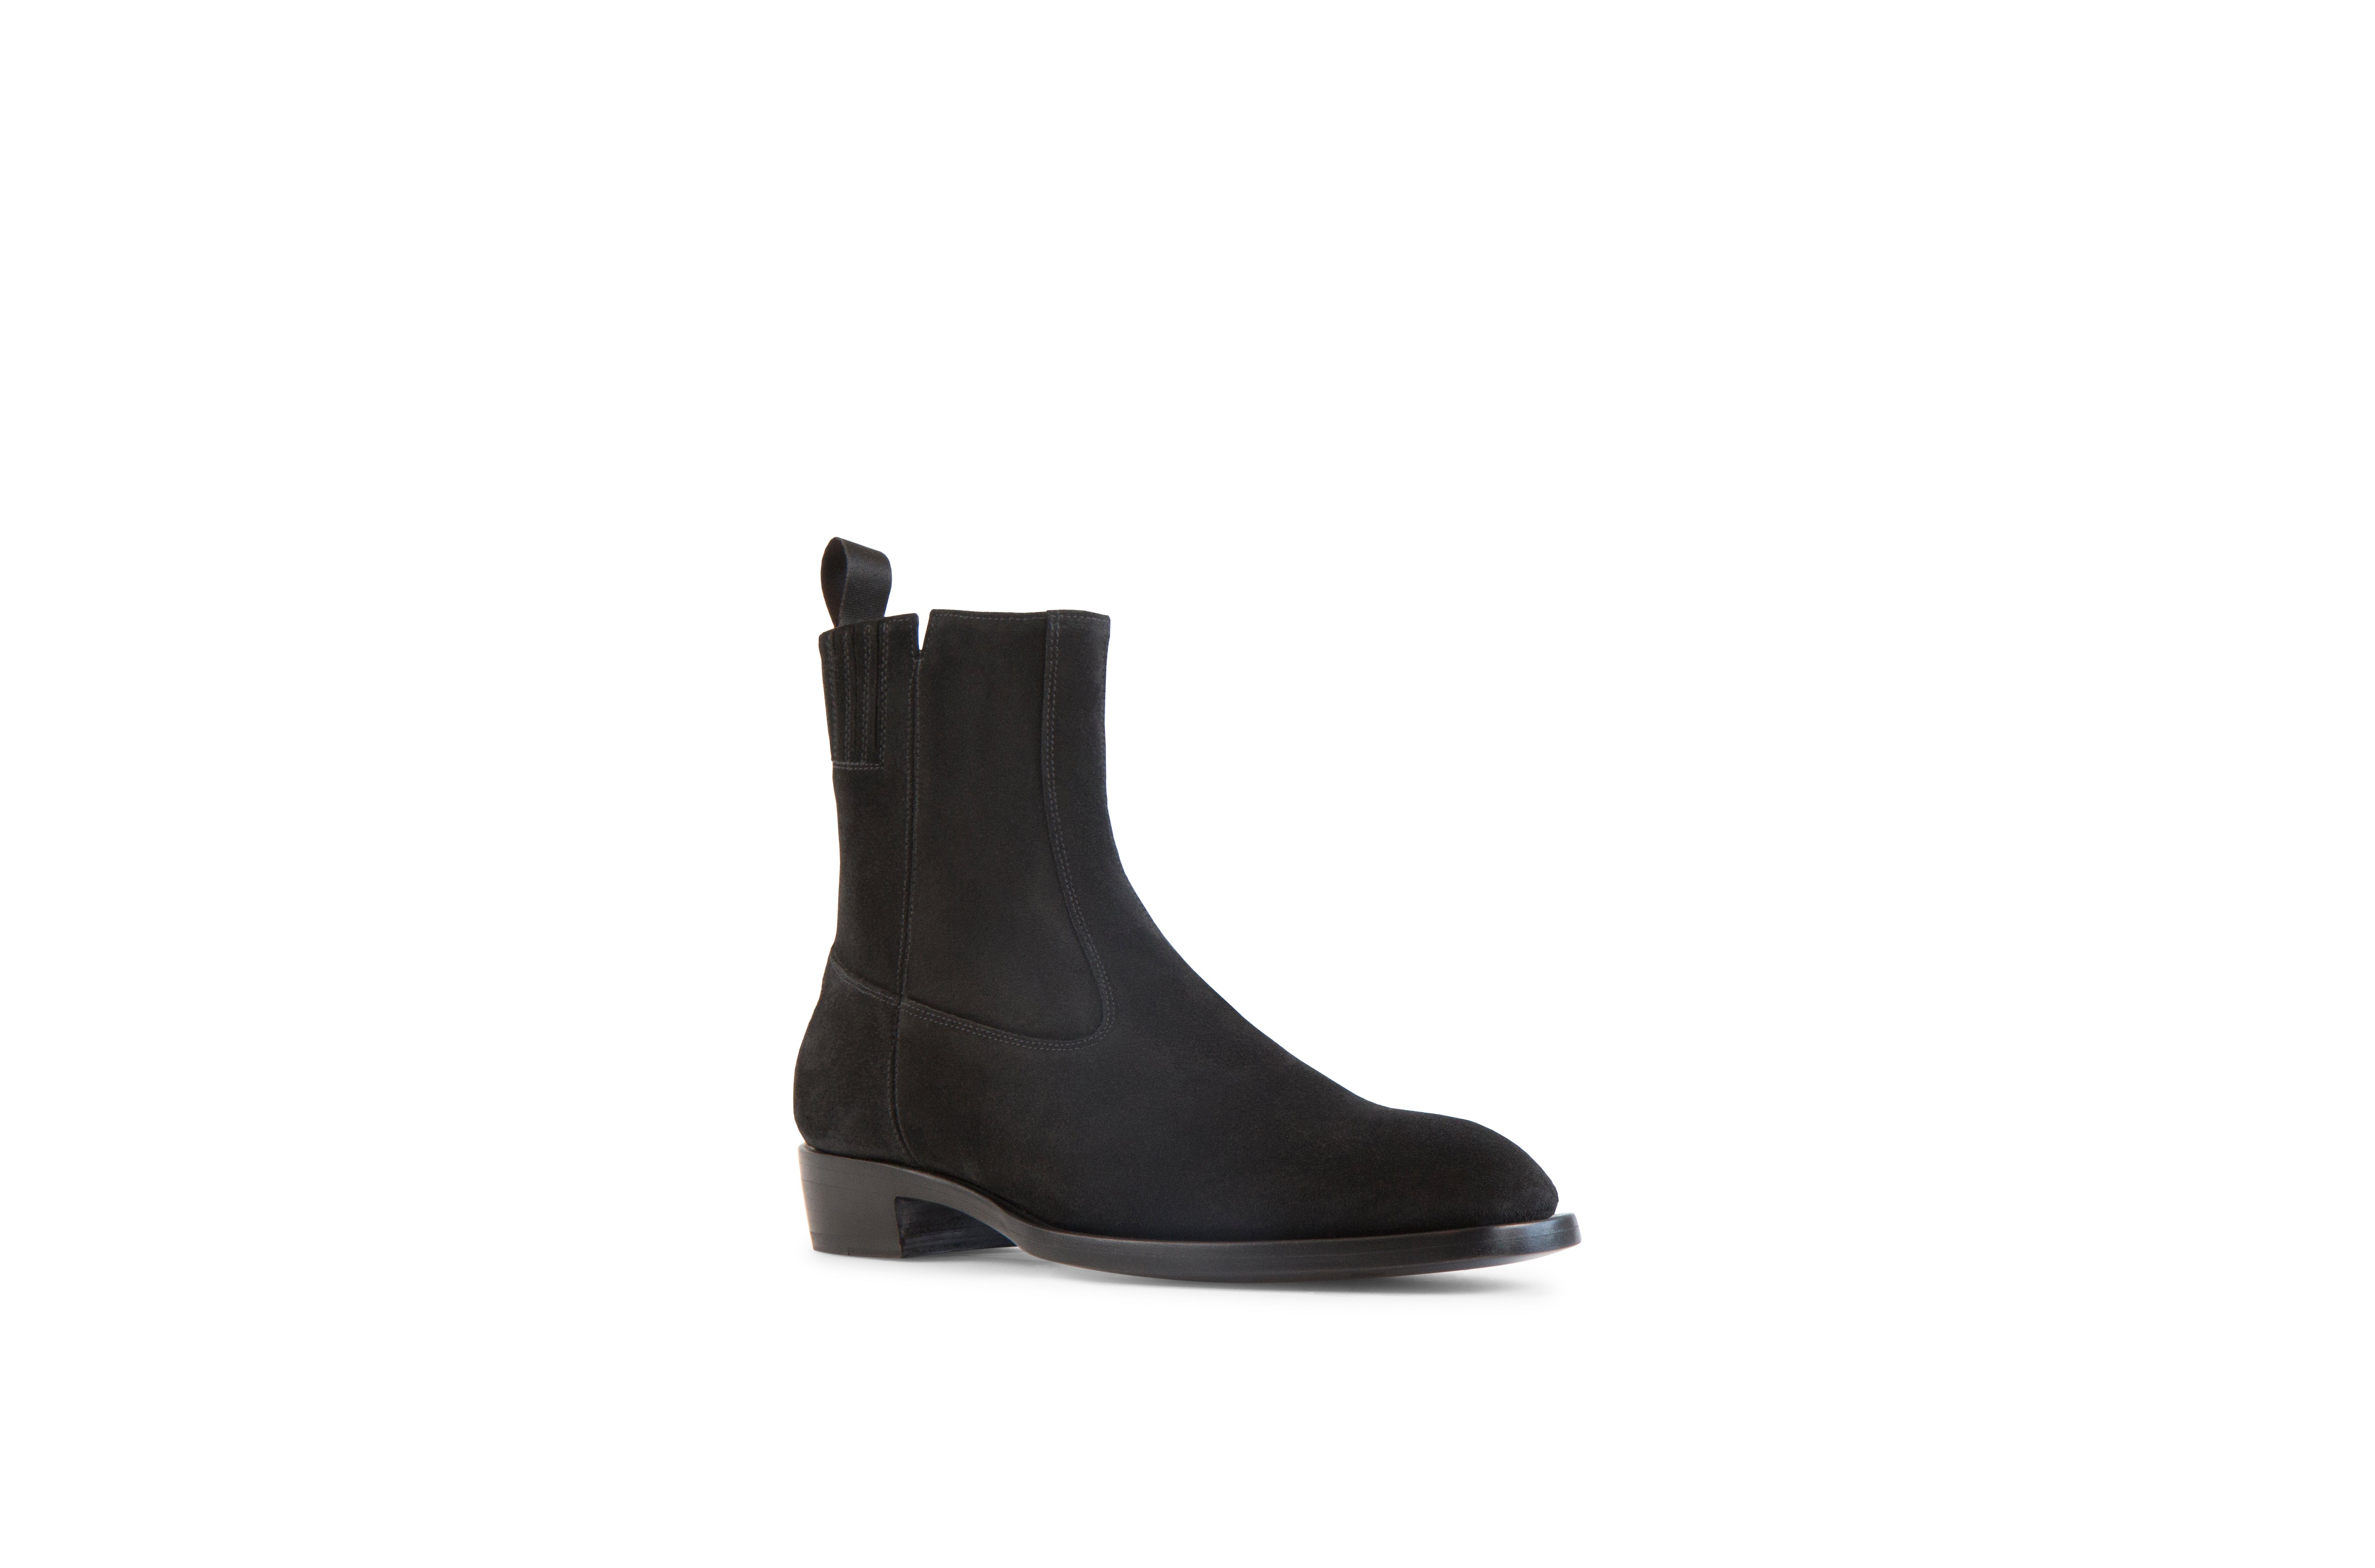 Hellstrom Black Suede Leather Zipper Boots